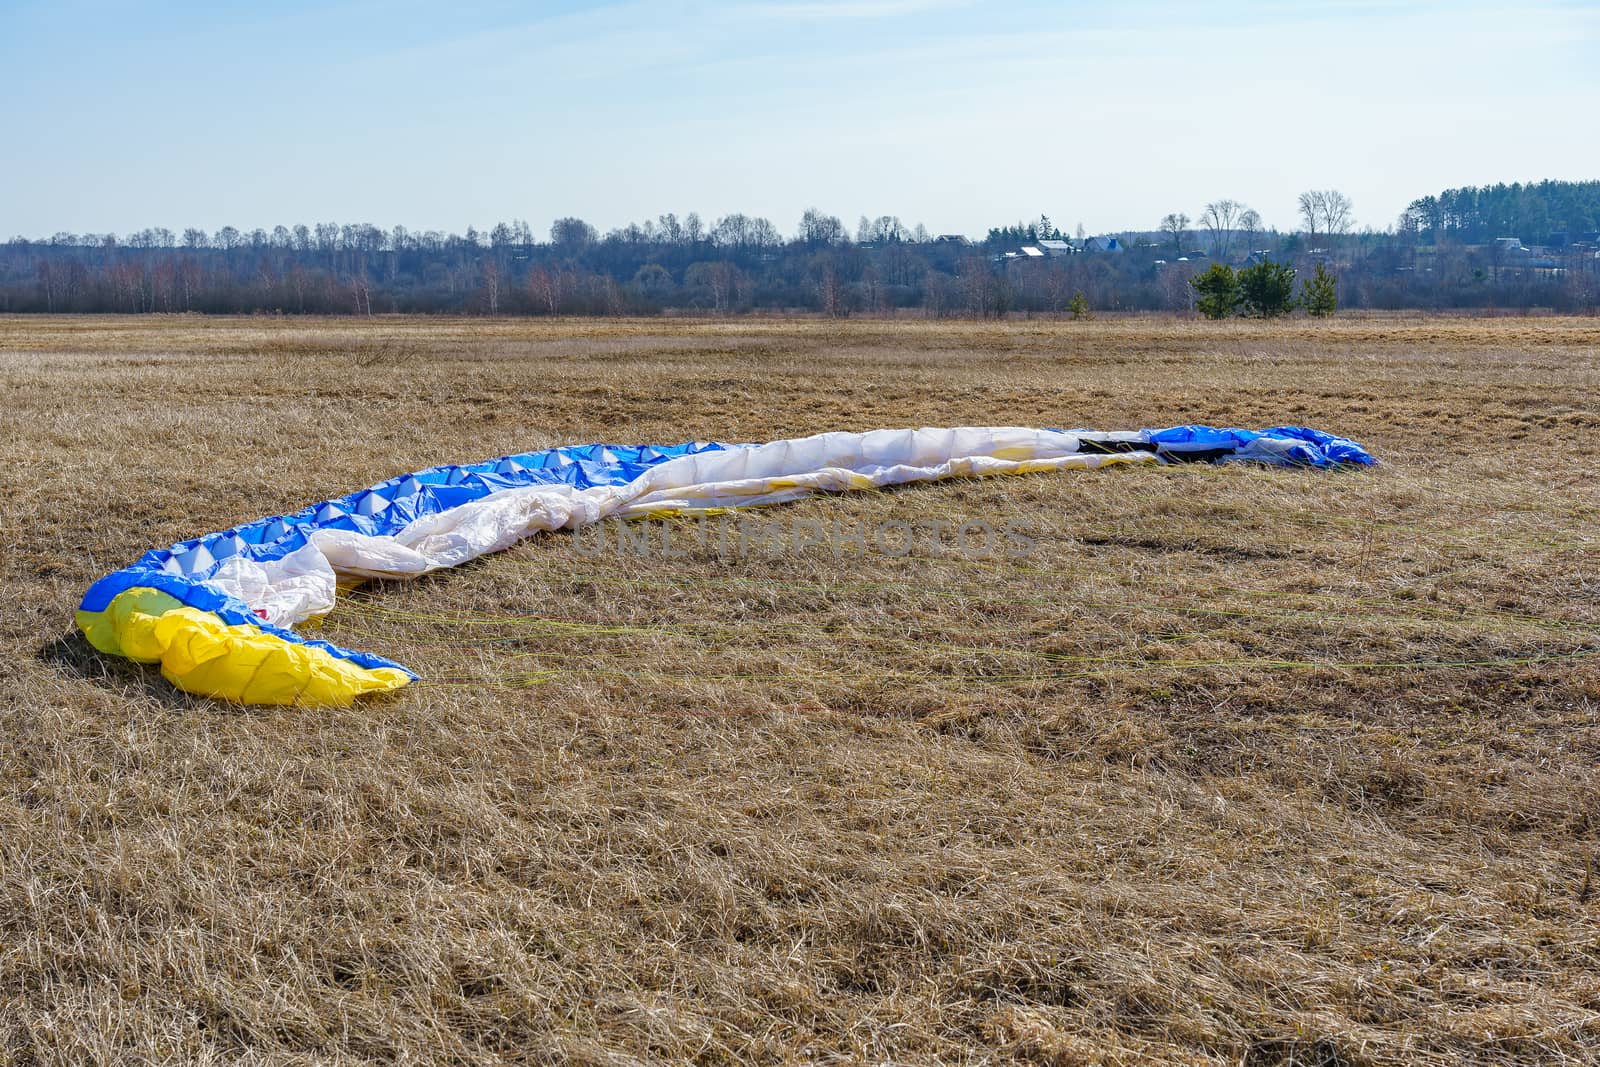 parachute spread on dry grass on the field on a sunny day by VADIM